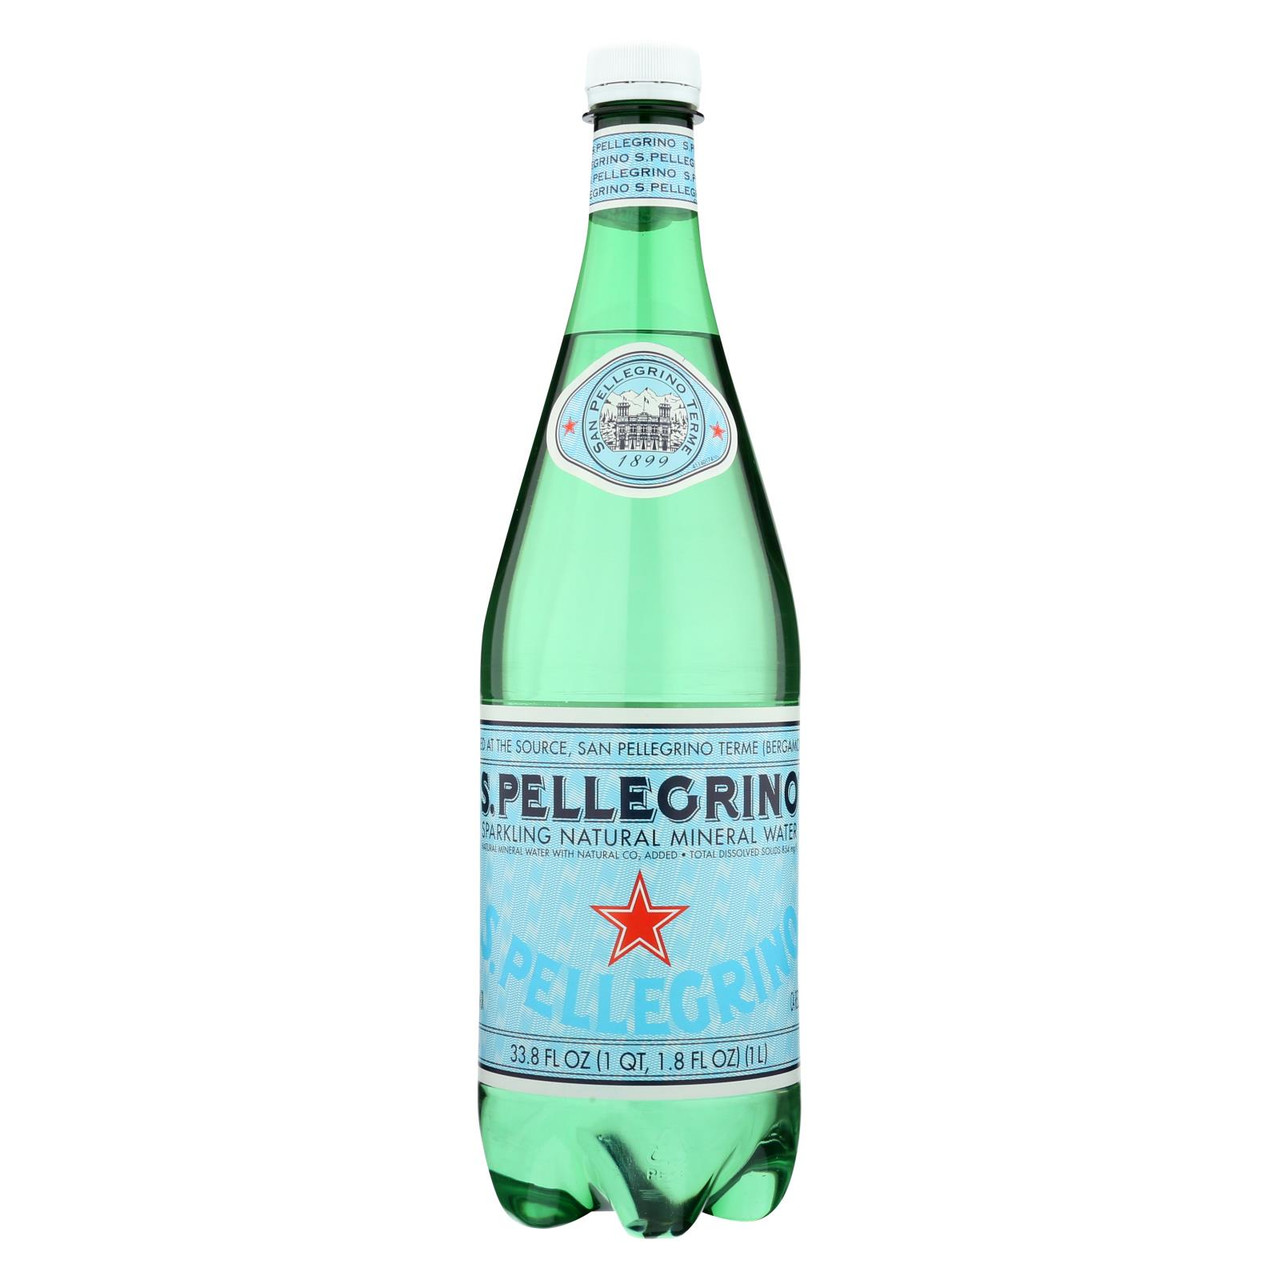 S Pellegrino Sparkling Natural Mineral Water Case